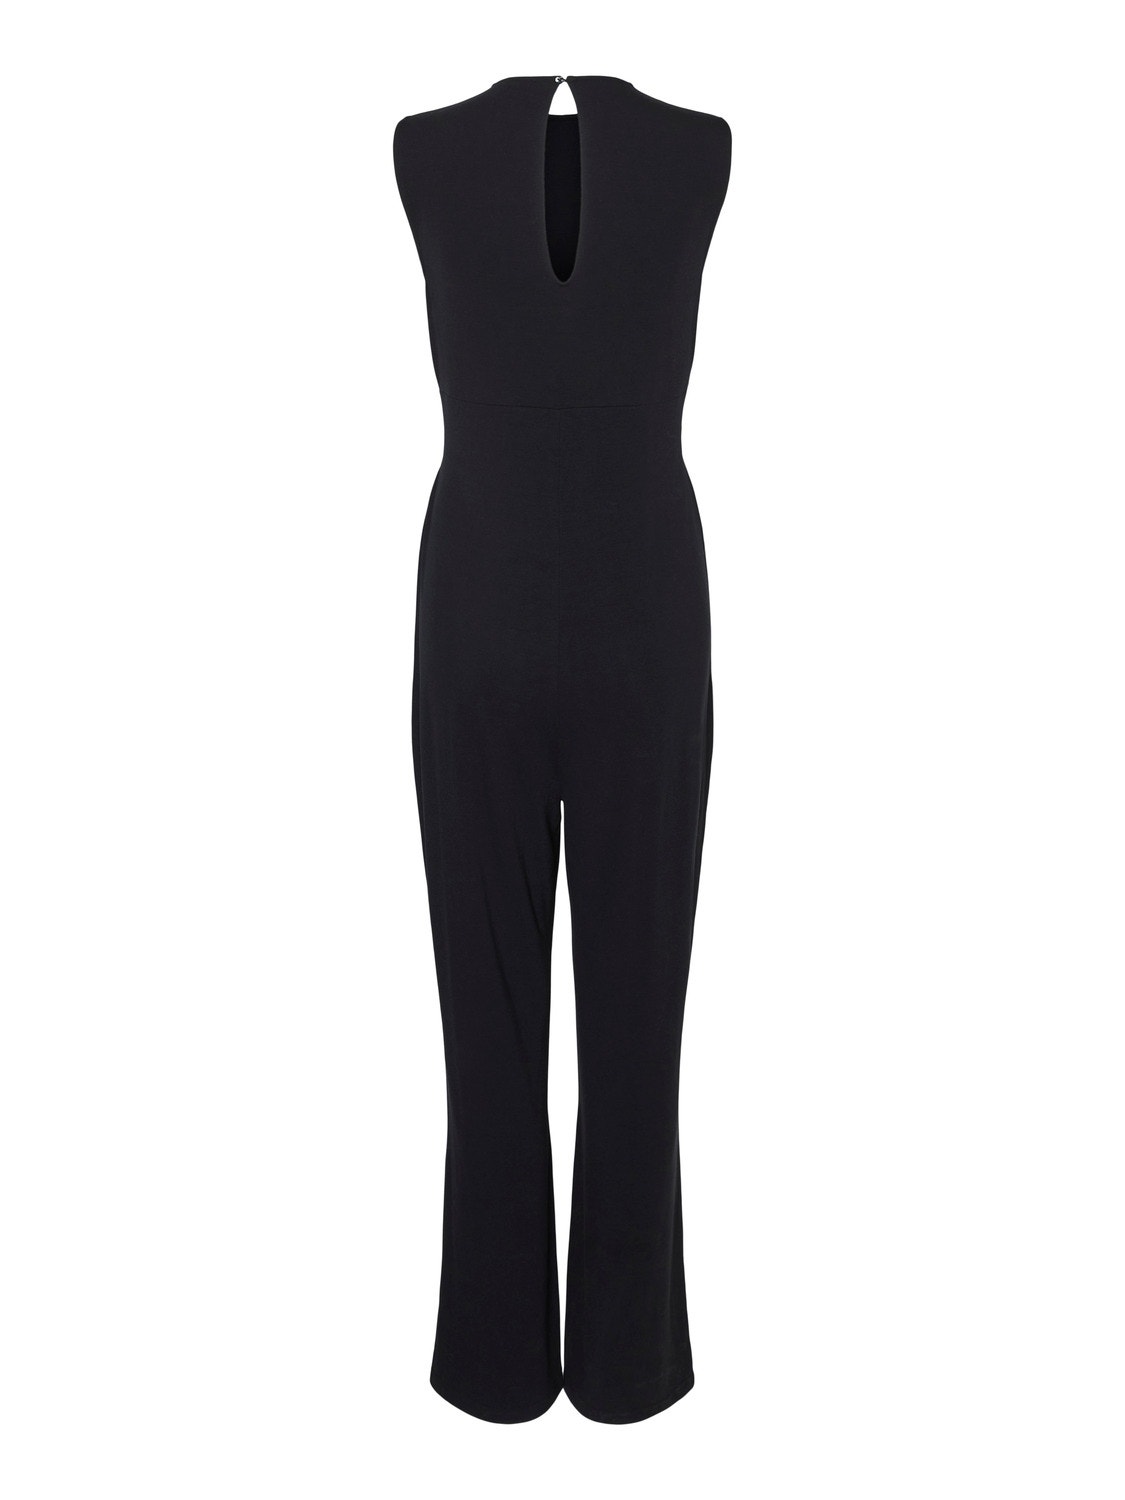 MAMA.LICIOUS Umstands-jumpsuit -Black - 20019164